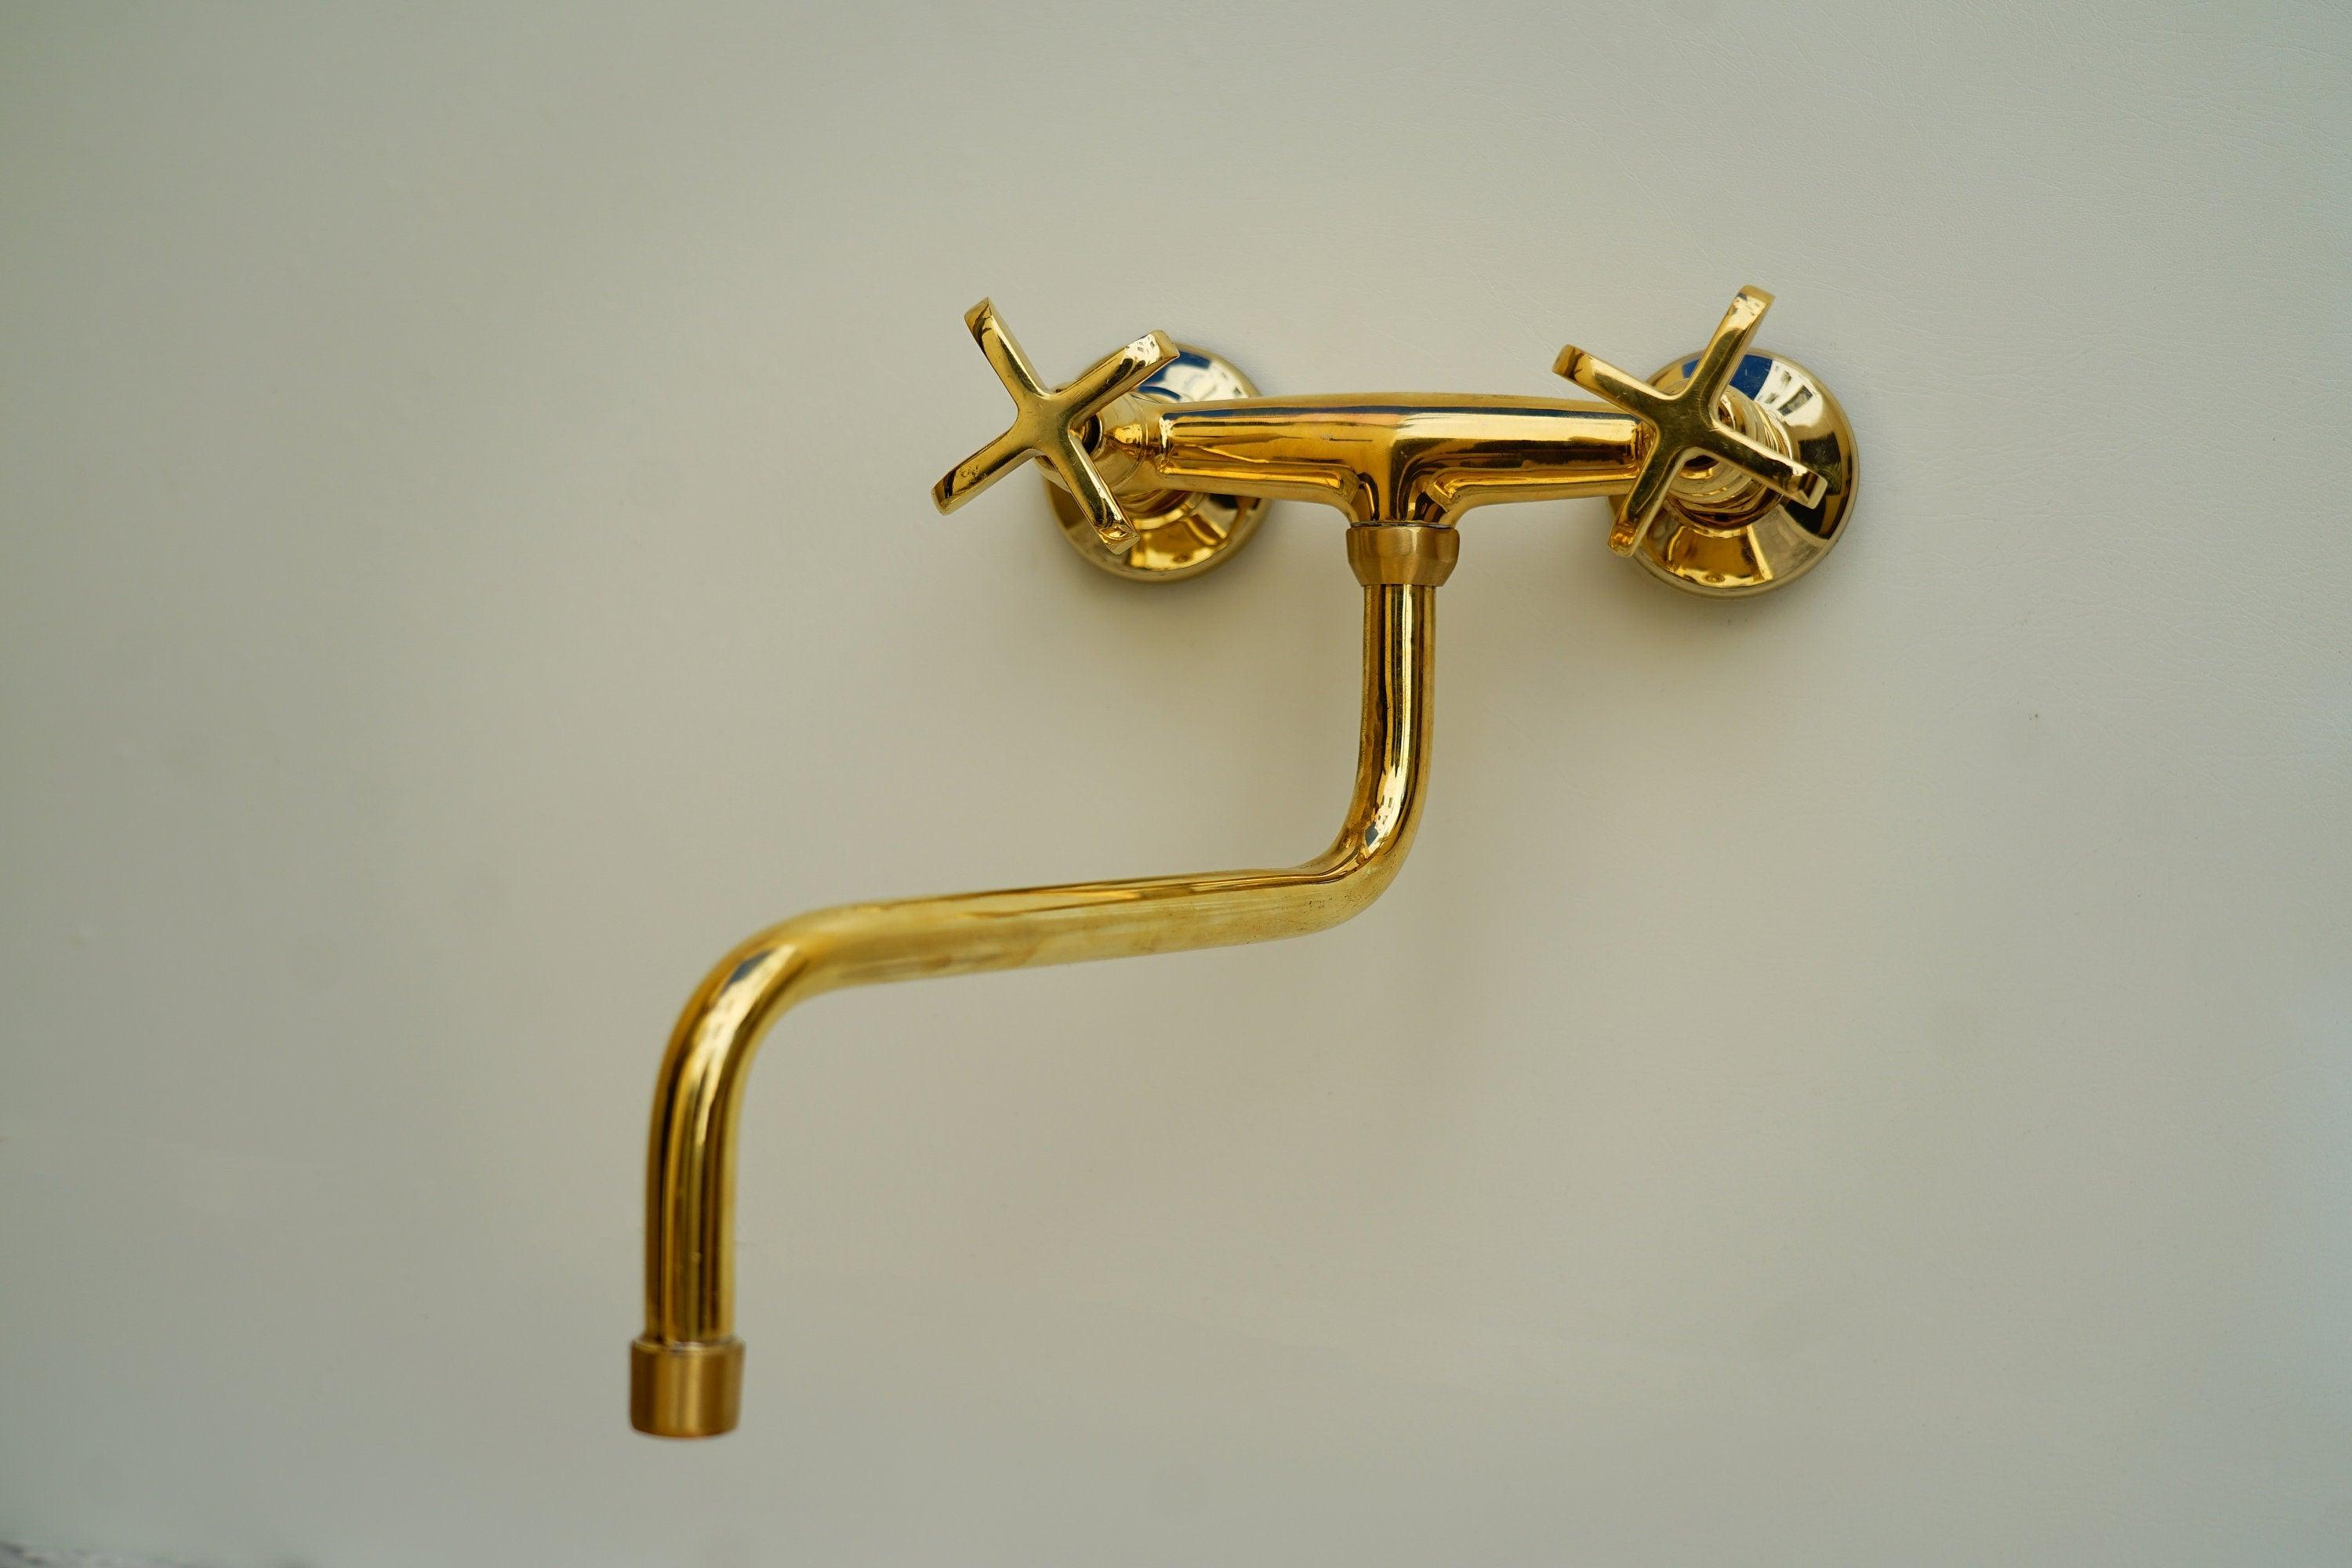 Hammered Patina Brass Wall Mount Sink With Solid Brass Faucet